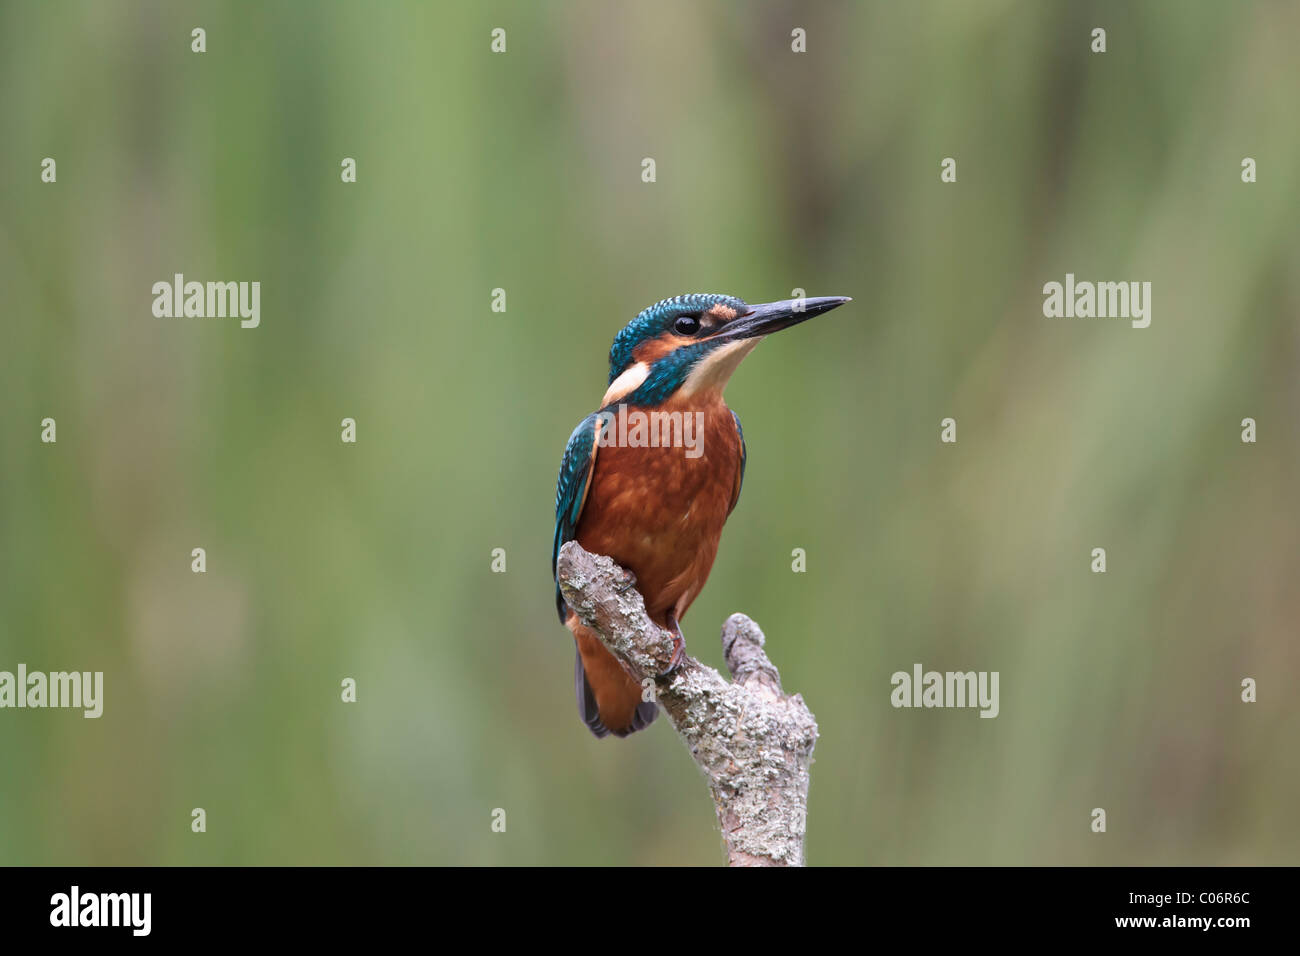 Kingfisher perched  against a  background of green foliage Stock Photo